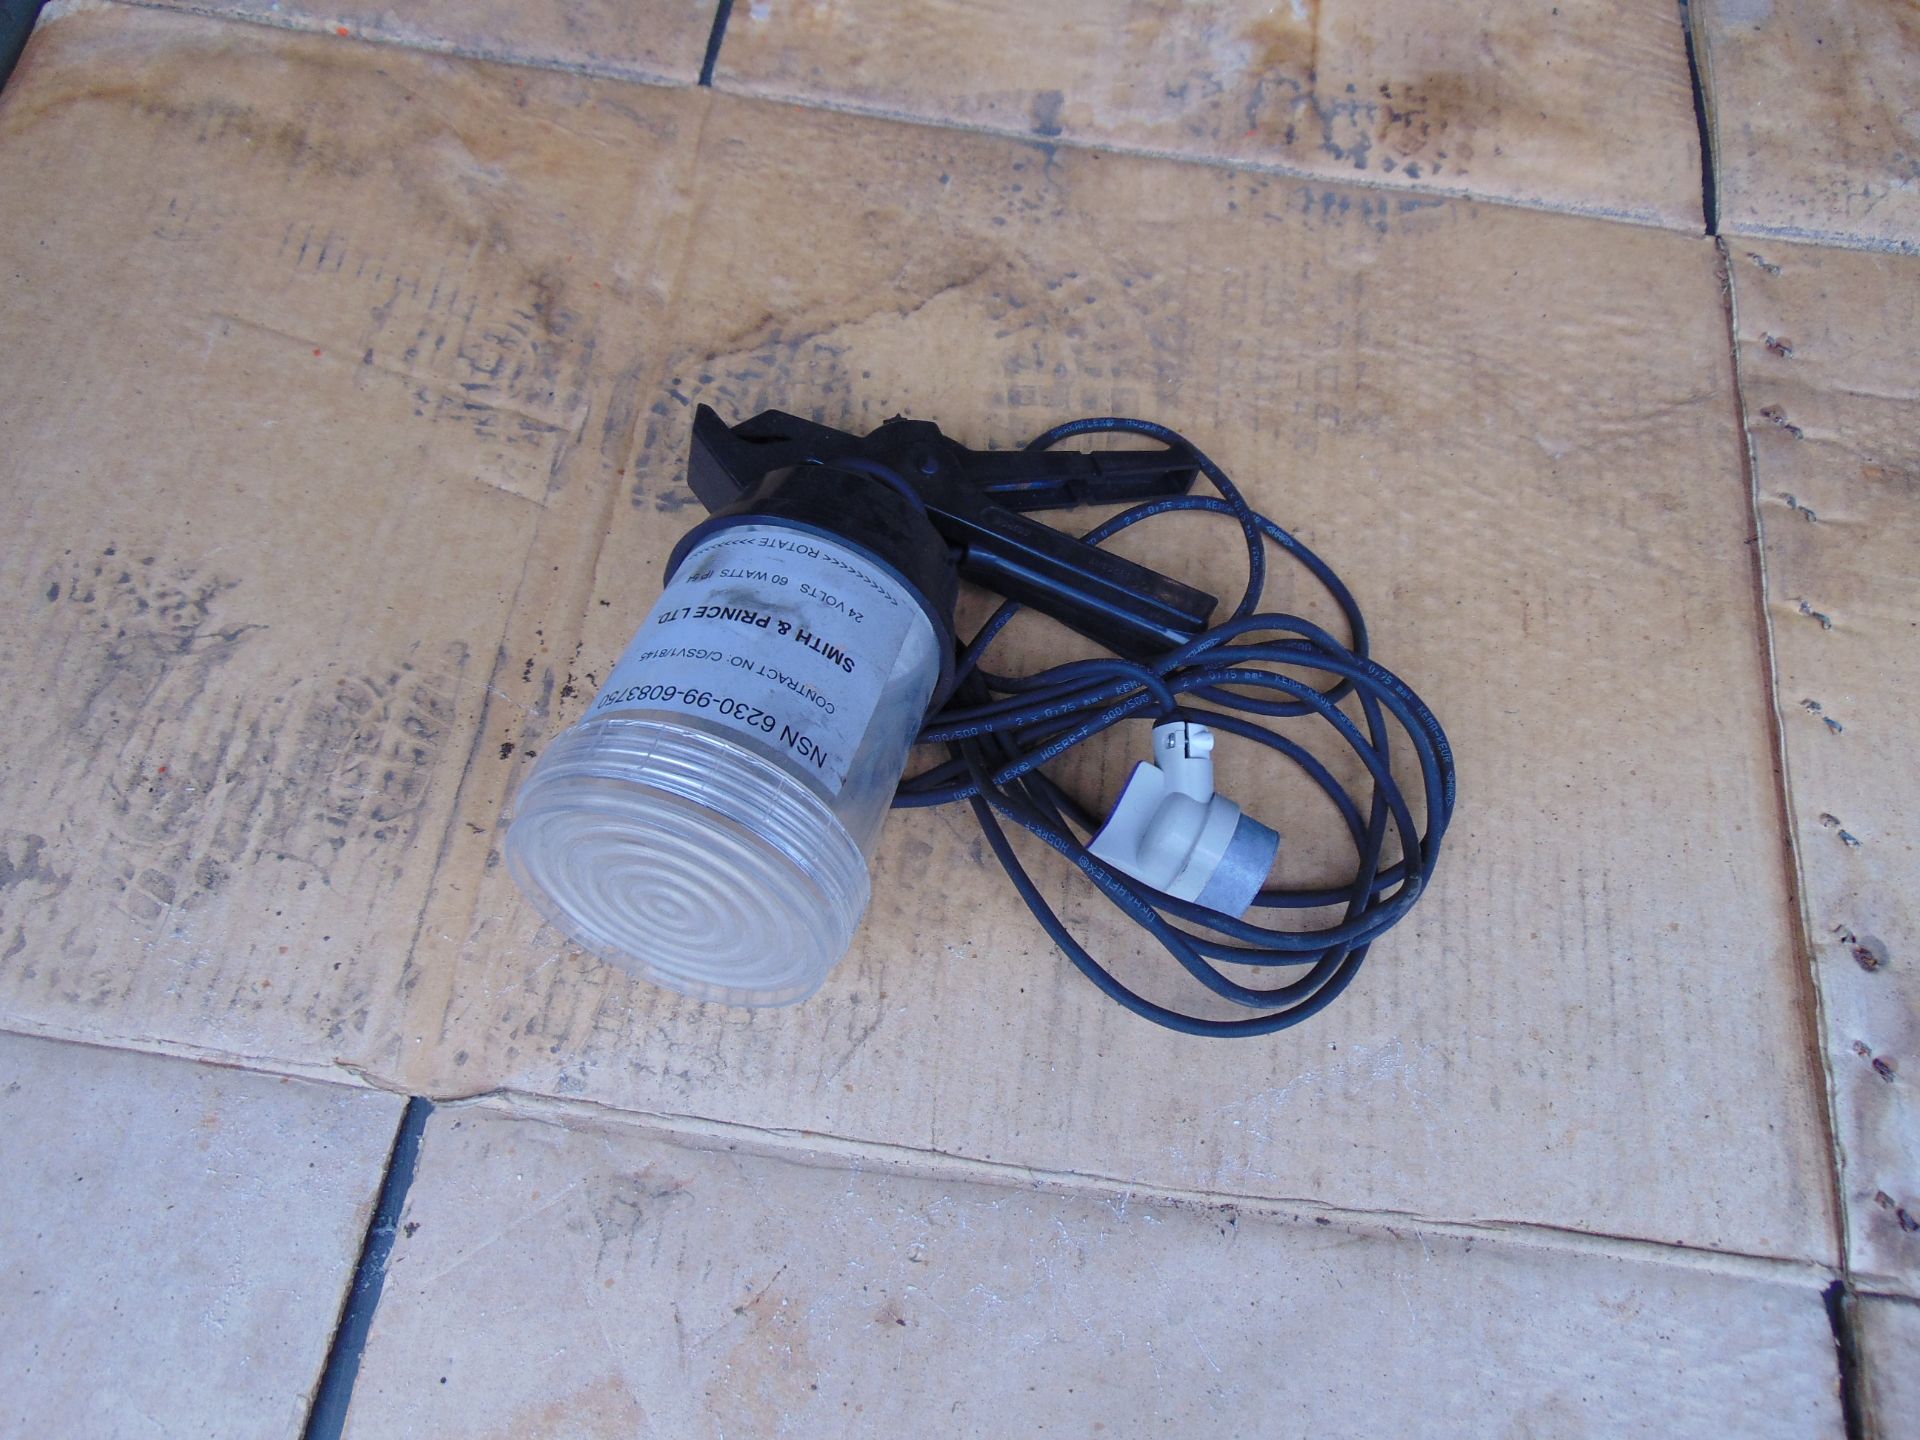 New Unissued Smith and Prince 24v Inspection Lamp - Image 2 of 5